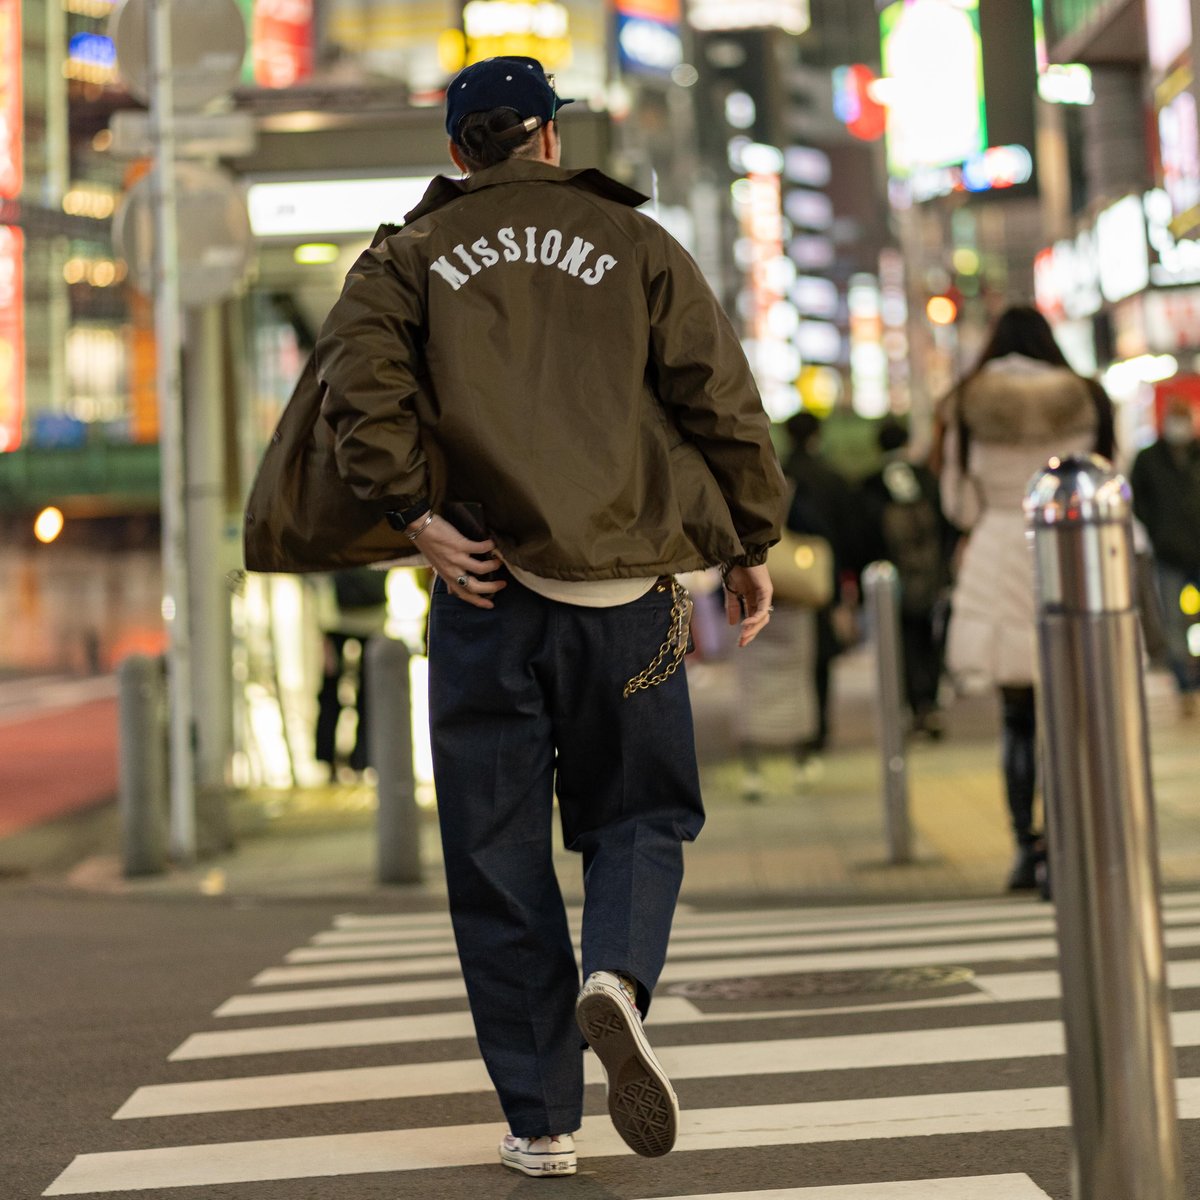 SF MISSIONS COACH JACKET (Brown) | NATIVE JAPAN...